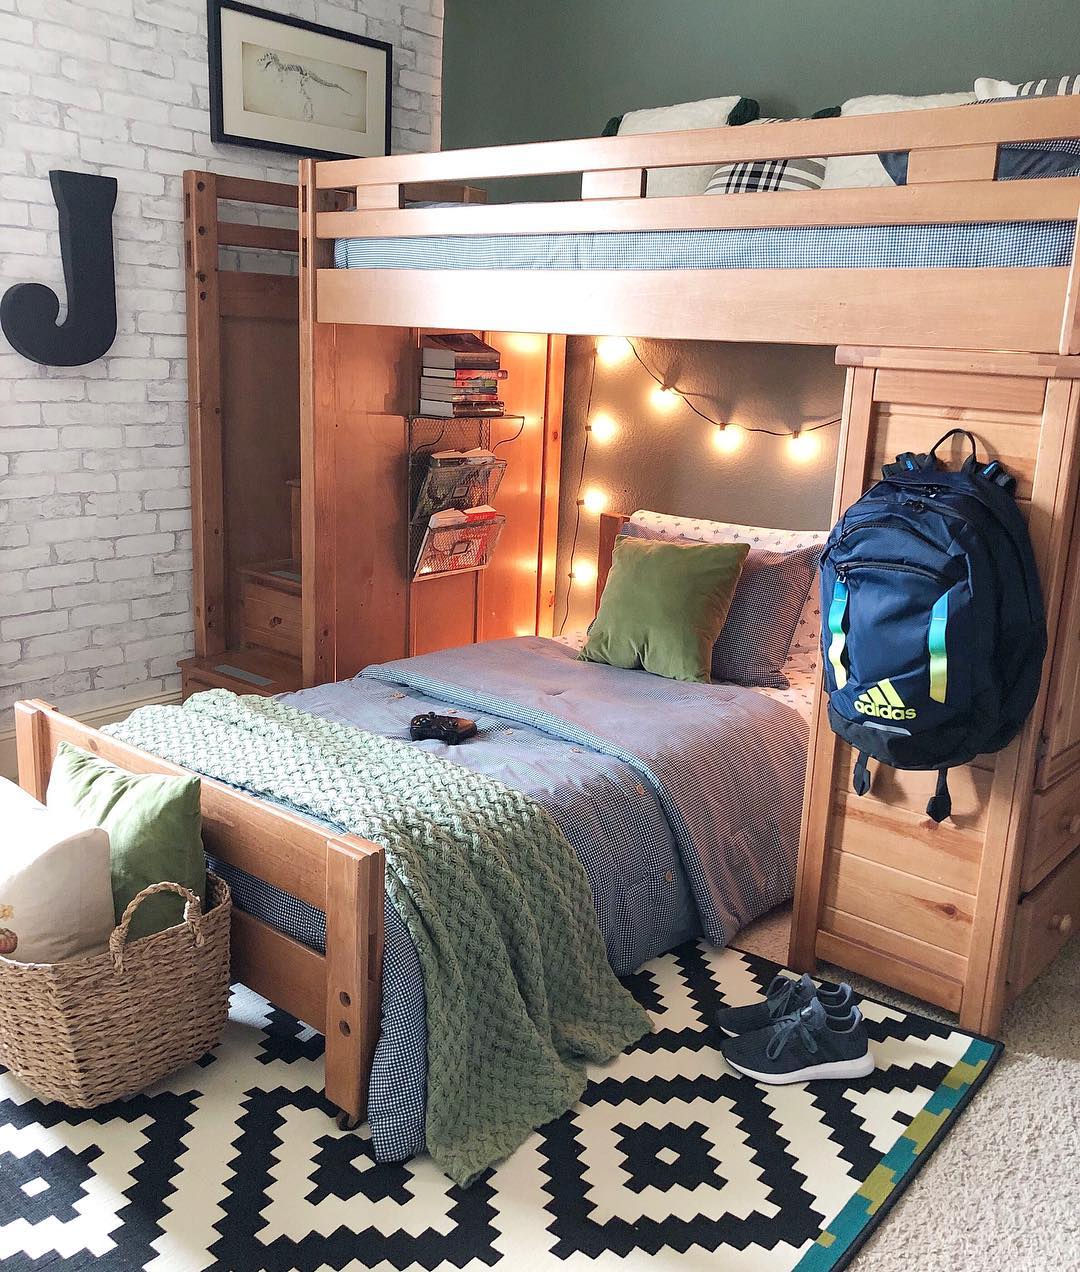 Bedroom with bunk beds and fun zig-zag carpet.